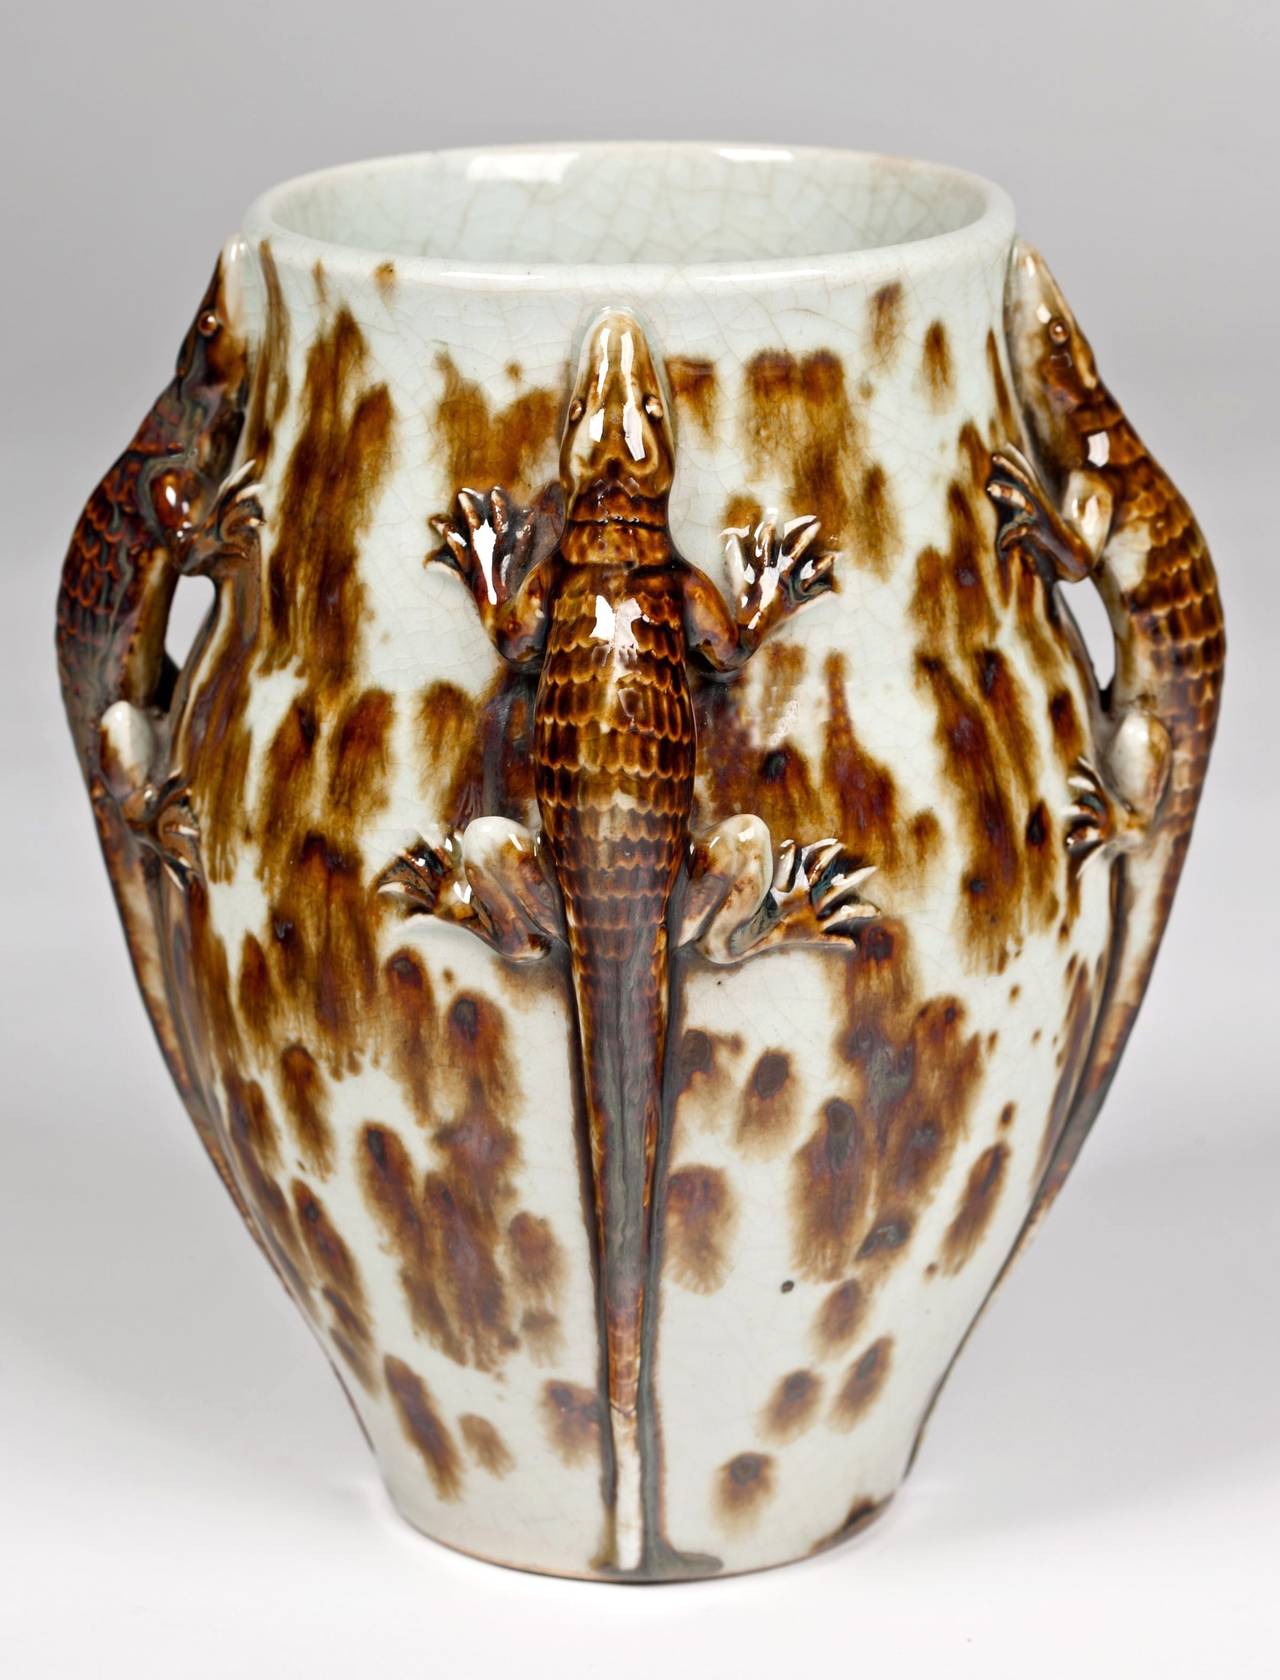 An outstanding French deco Primavera vase with lizards surrounding the sides in a mottled brown and white glossy craquelure glaze. Signed Primavera.

Note: Camera flashes on vase.